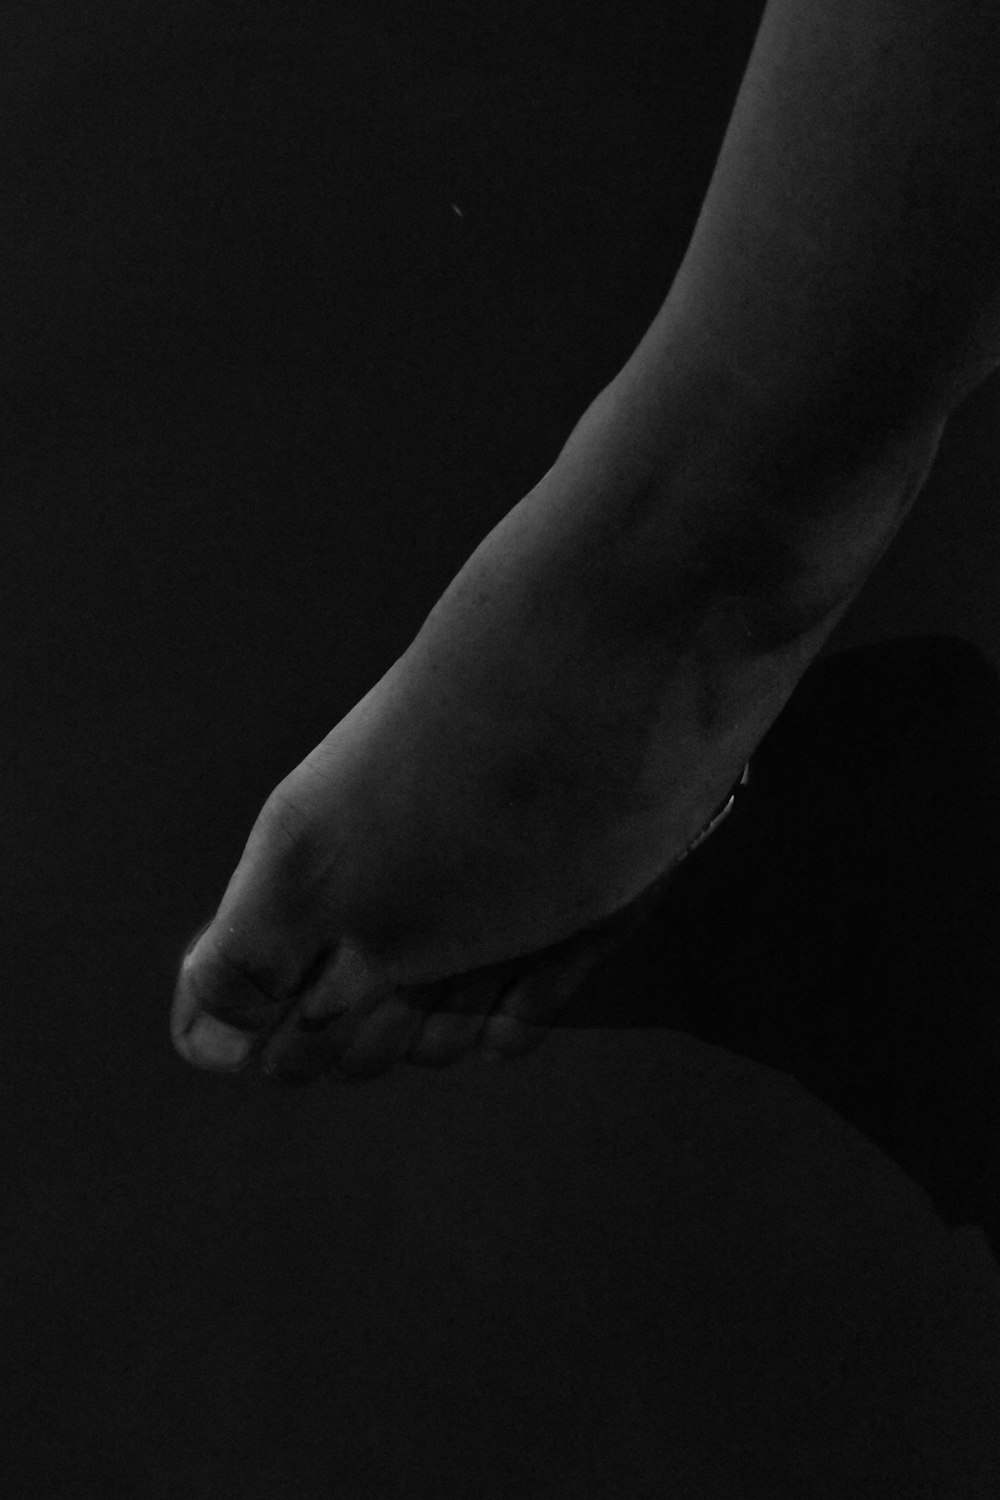 a black and white photo of a person's foot